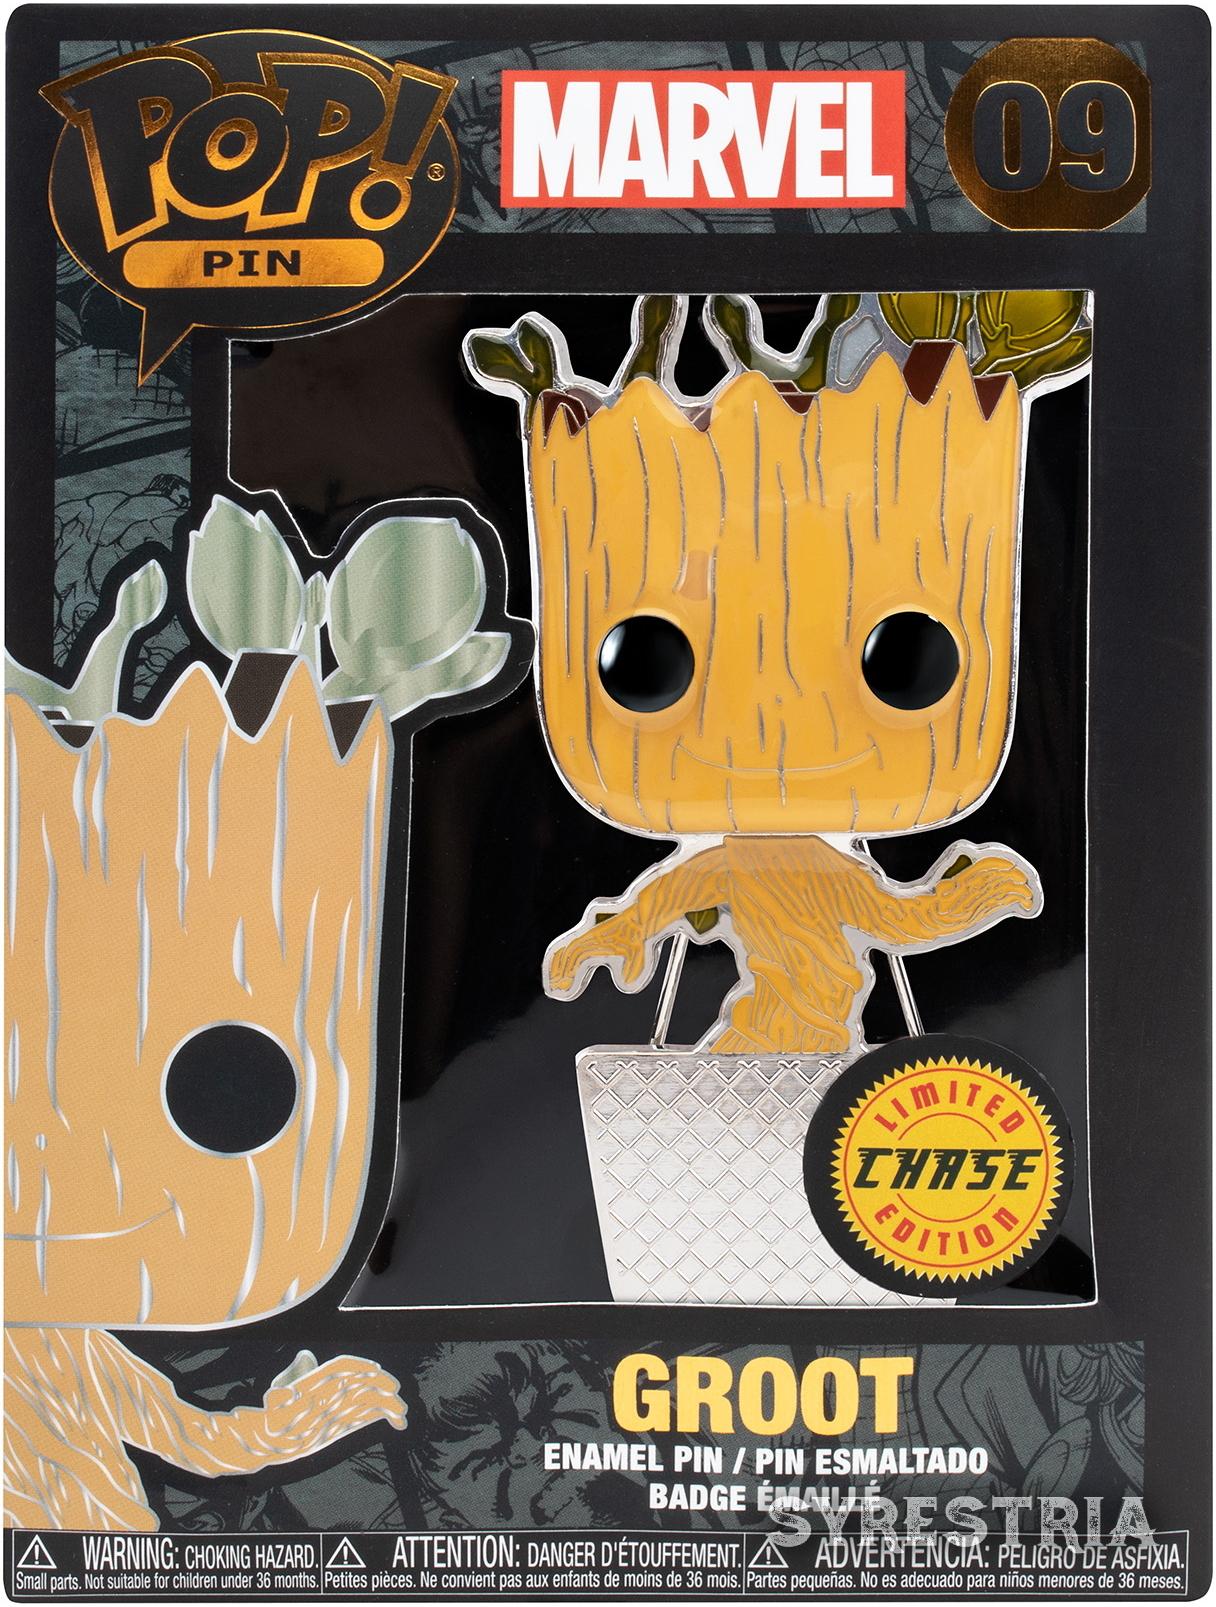 Marvel - Groot 09 Limited Chase Edition - Funko Pin